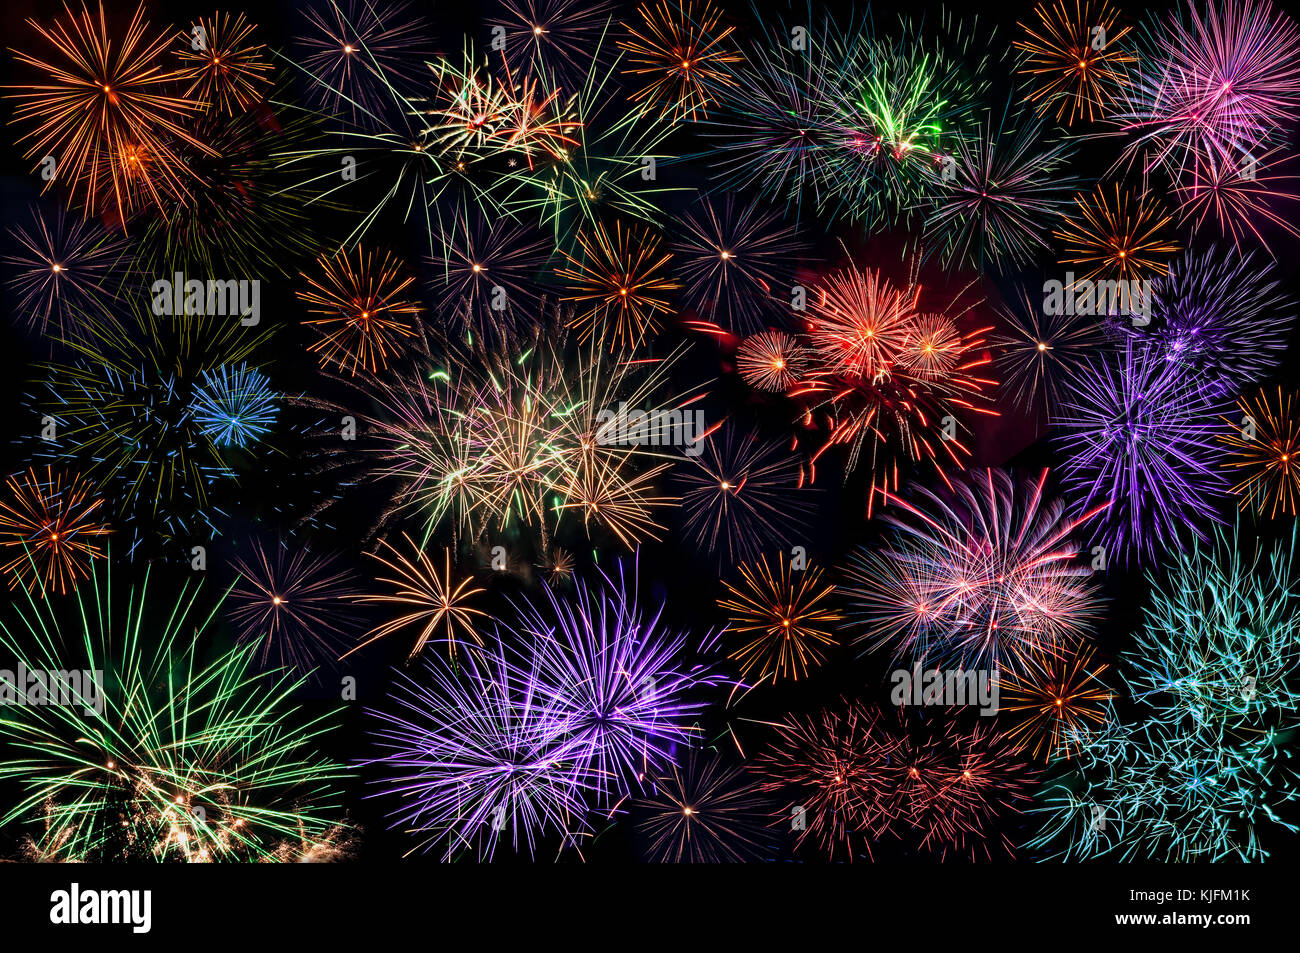 Colorful fireworks on the black background. Can be used as abstract background or wallpaper Stock Photo